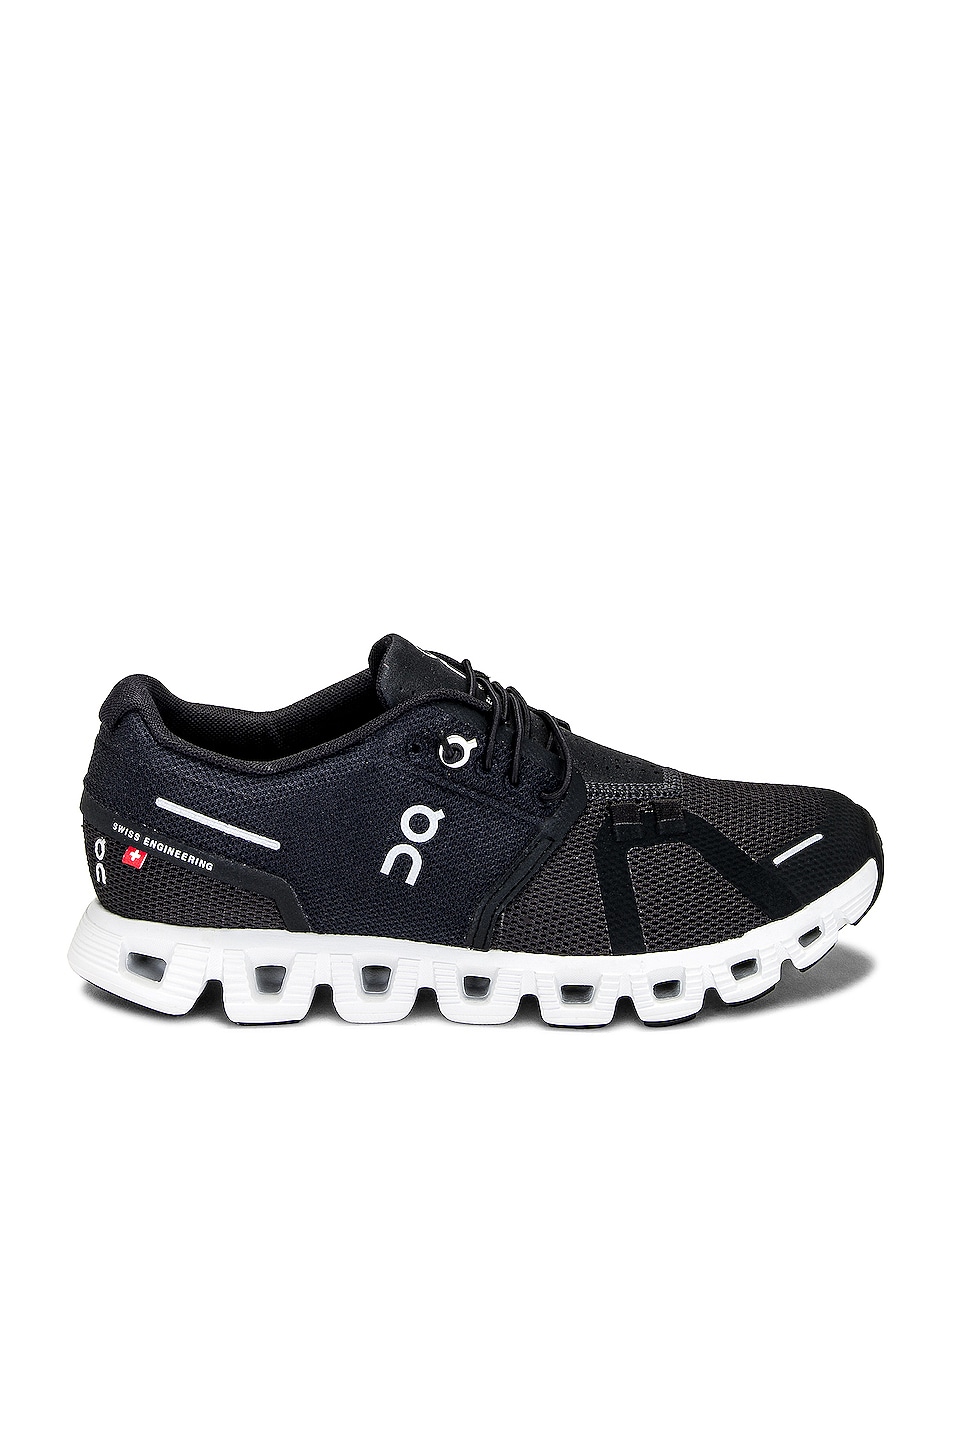 Image 1 of On Cloud 5 Sneakers in Black & White